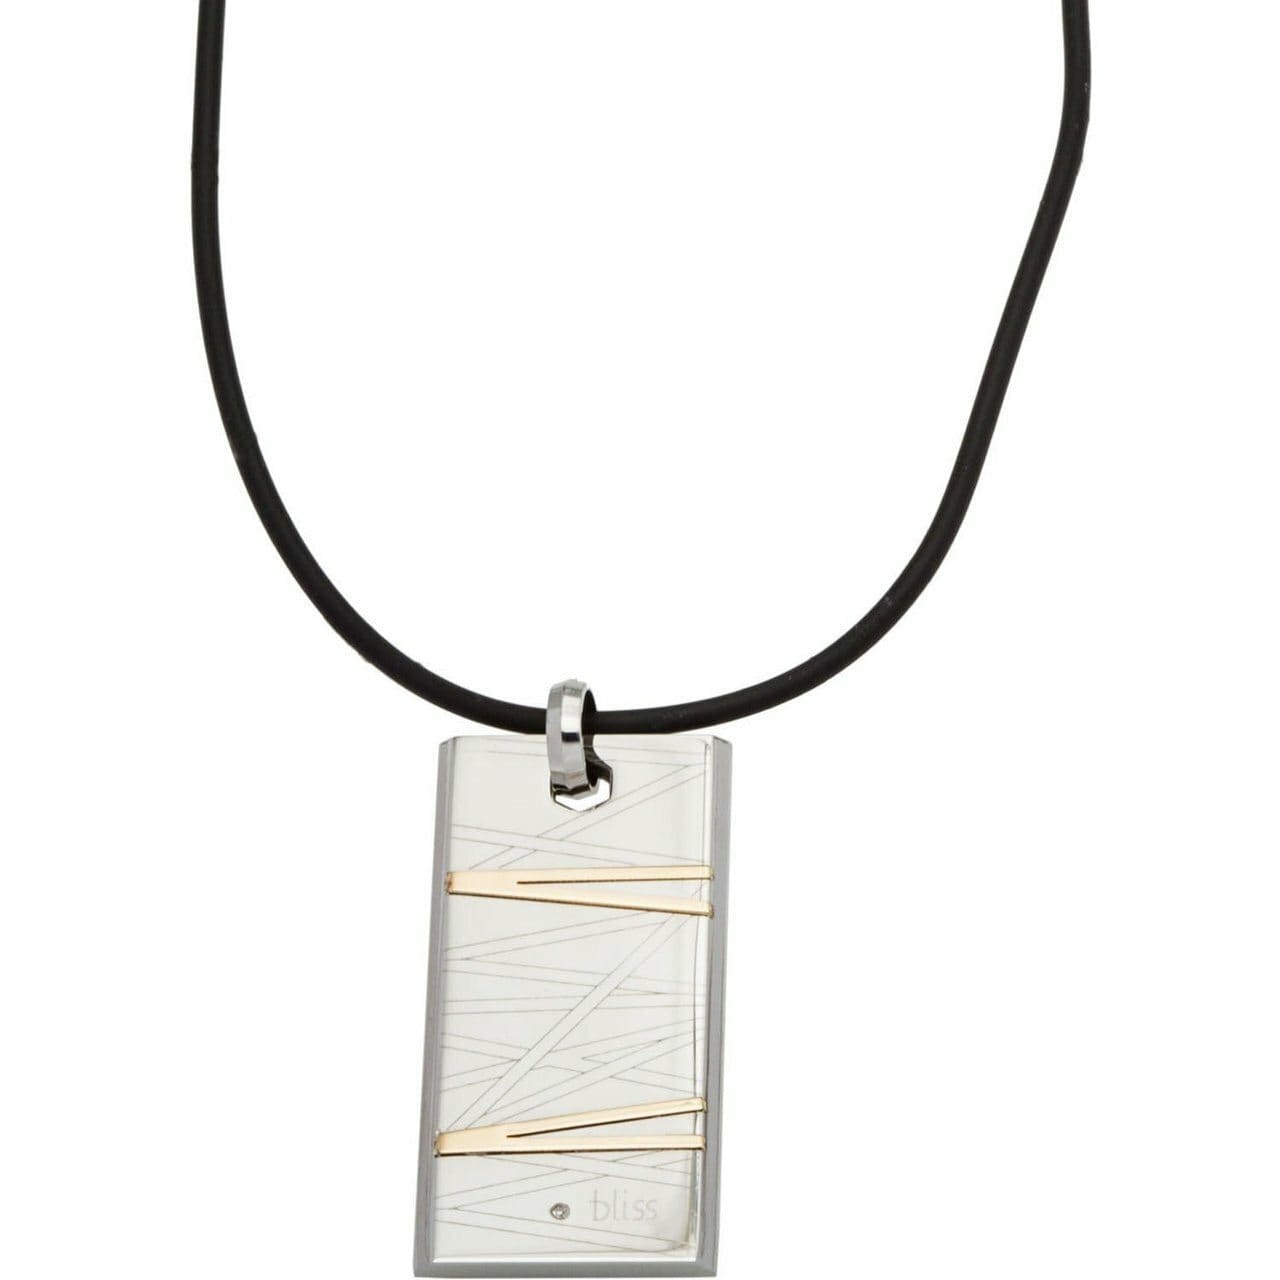 BLISS by Damiani - "Flash" Stainless Steel & 18K Yellow Gold Diamond Necklace 840771105586 20029530